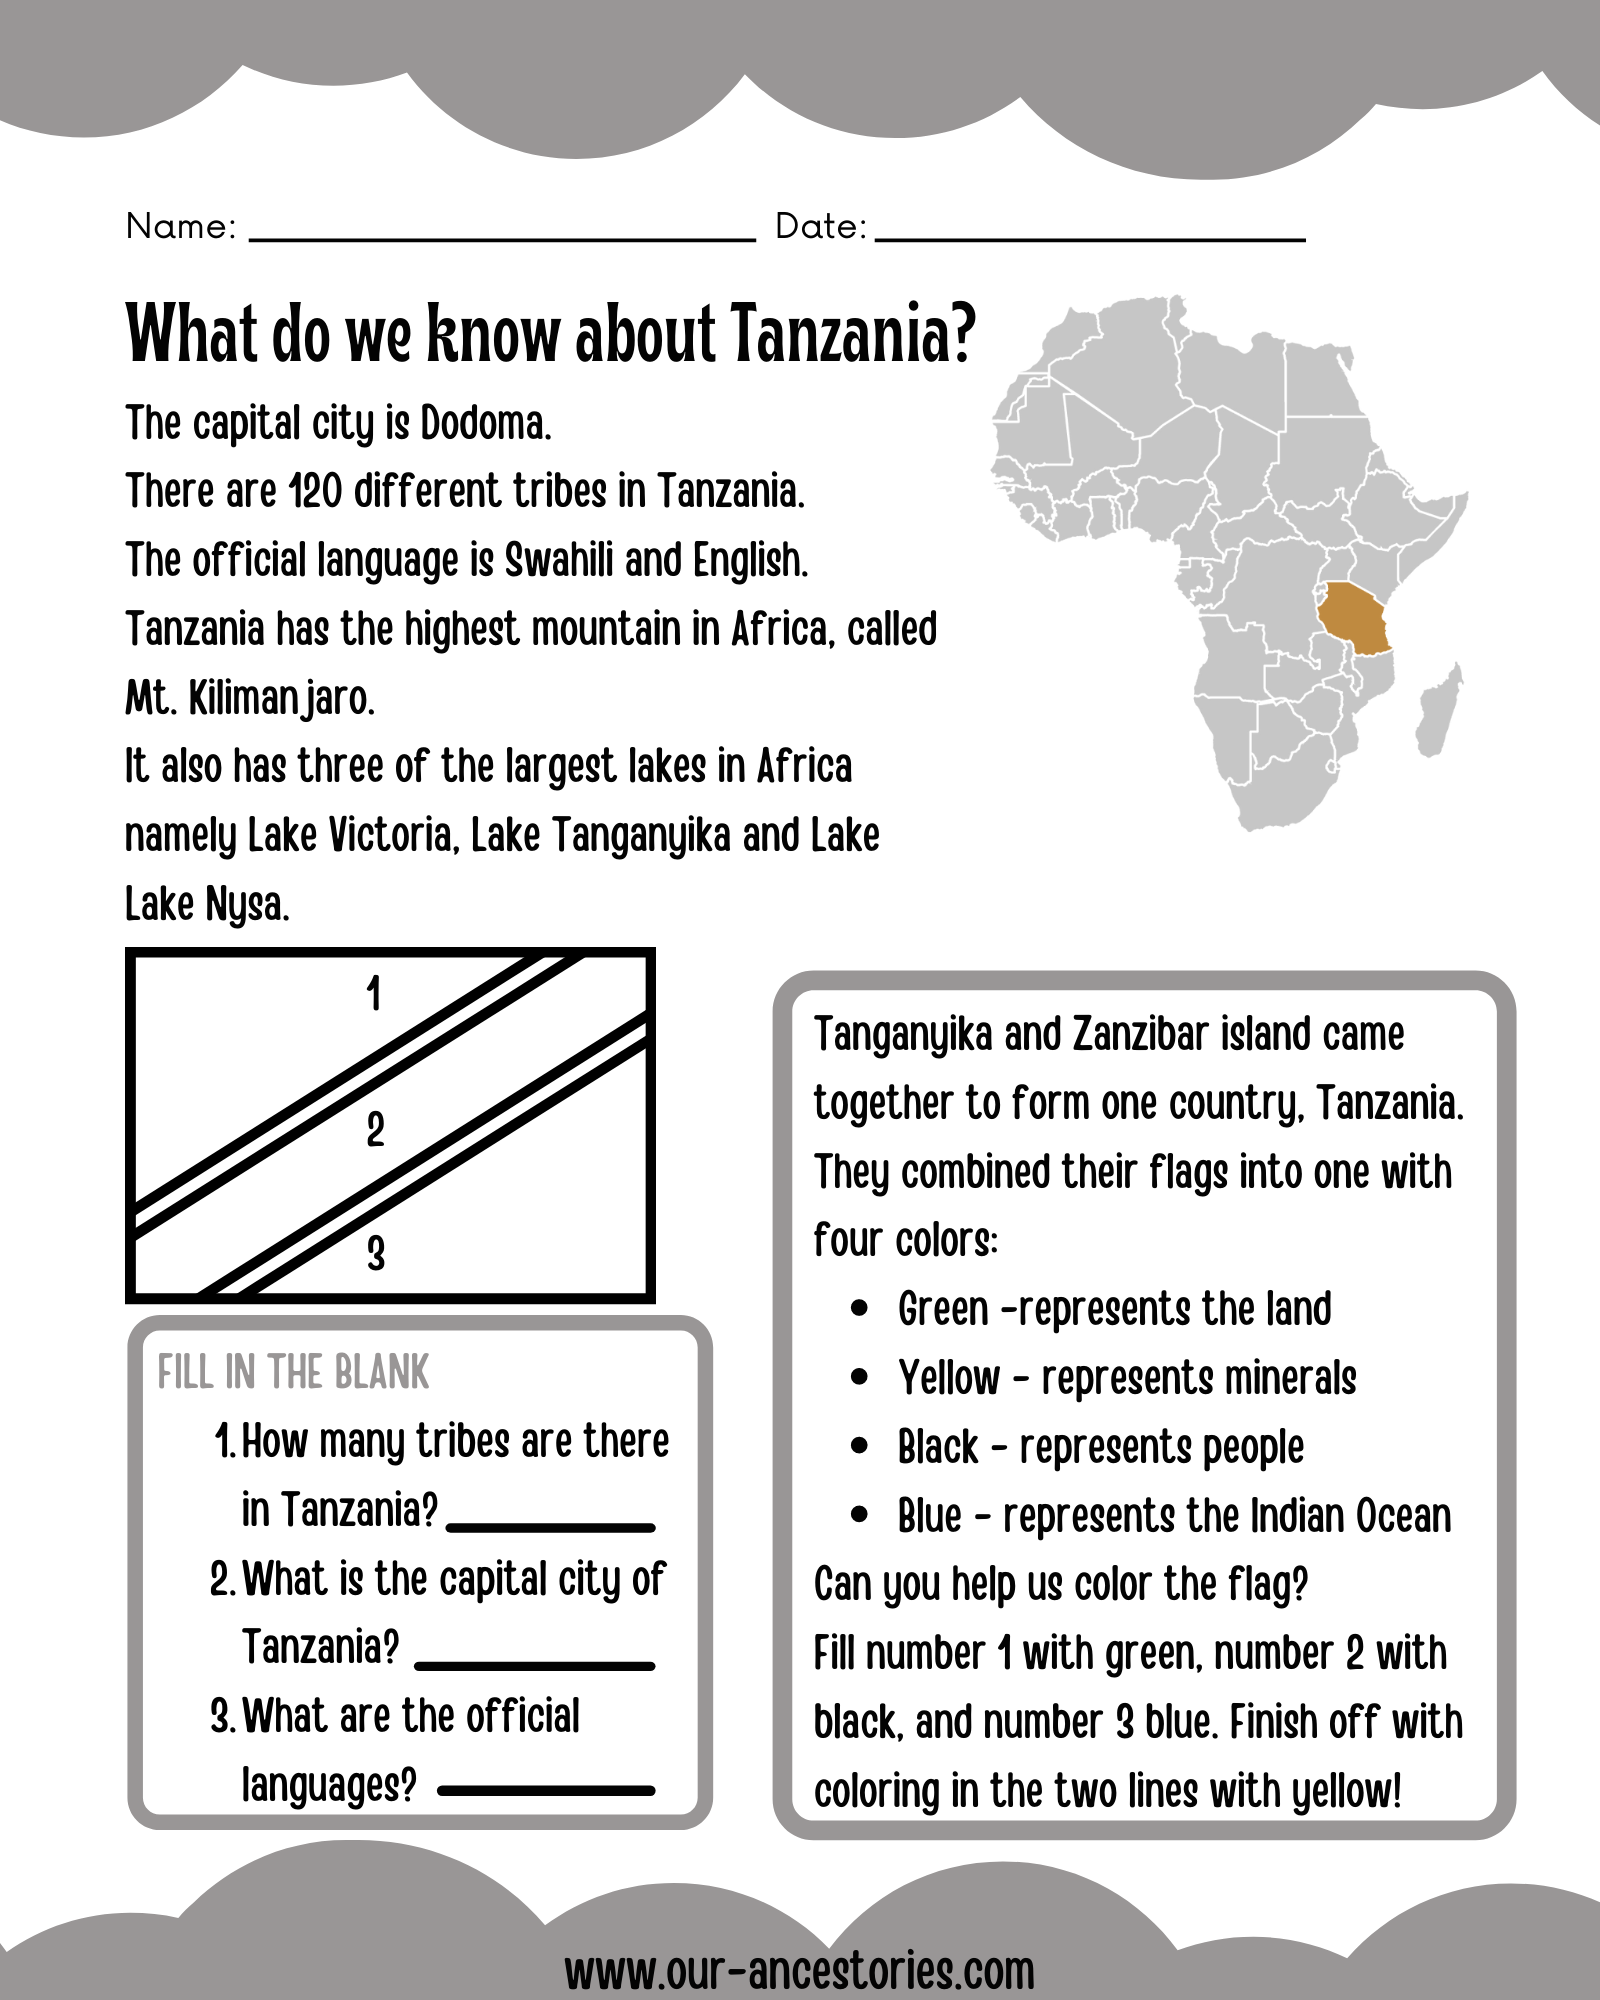 Our Ancestories - Tanzania Country Profile - Free Worksheets